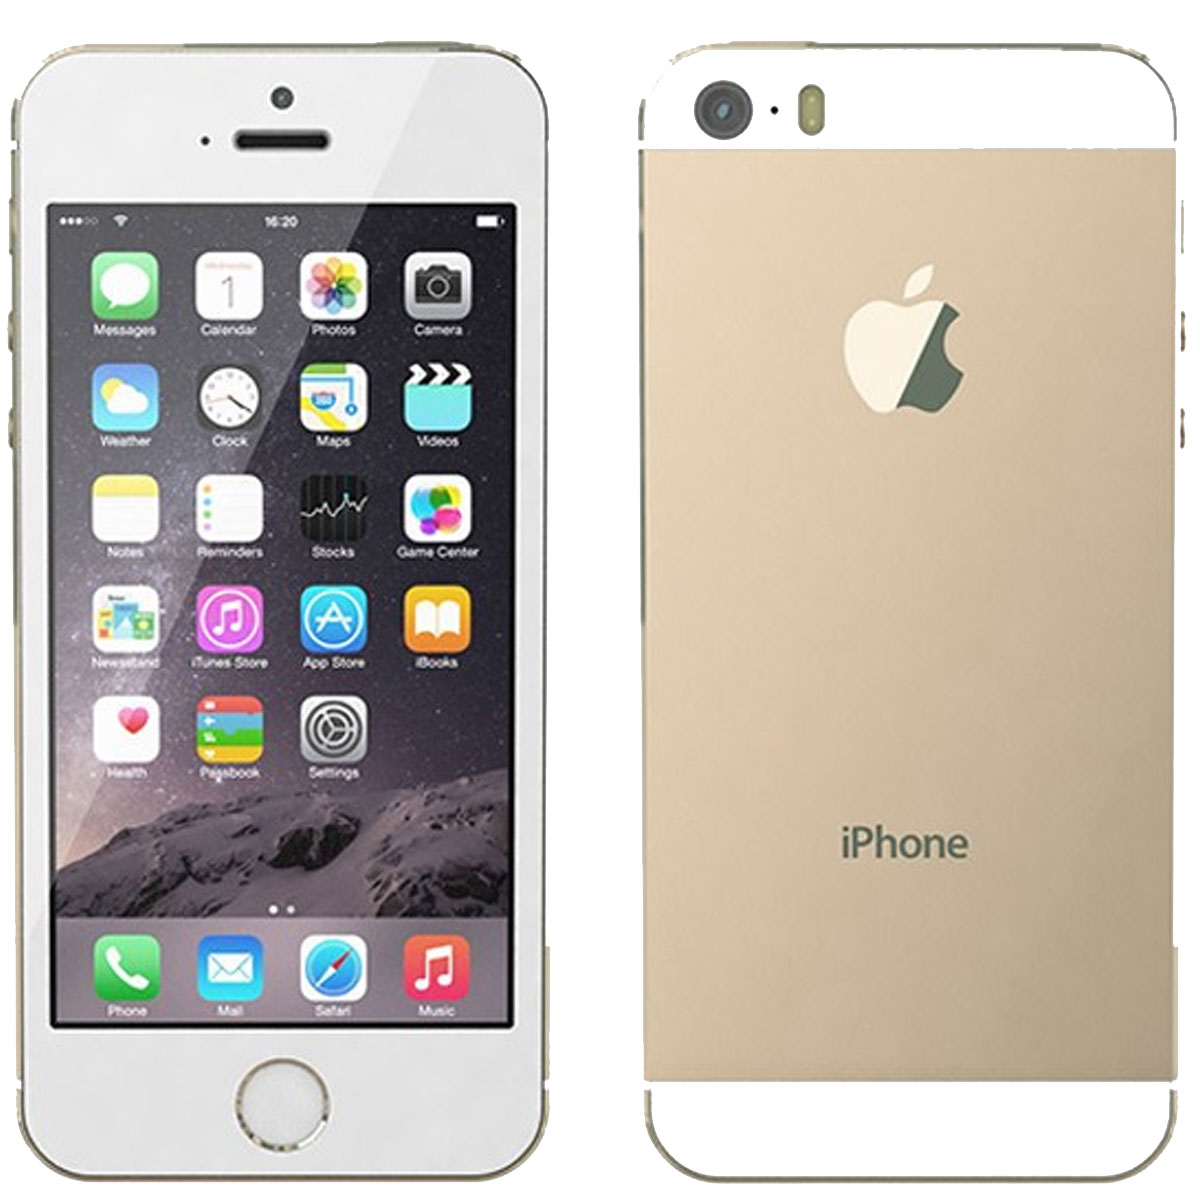 Derbevilletest motto Periodiek Apple iPhone 5s For Sale in Philly